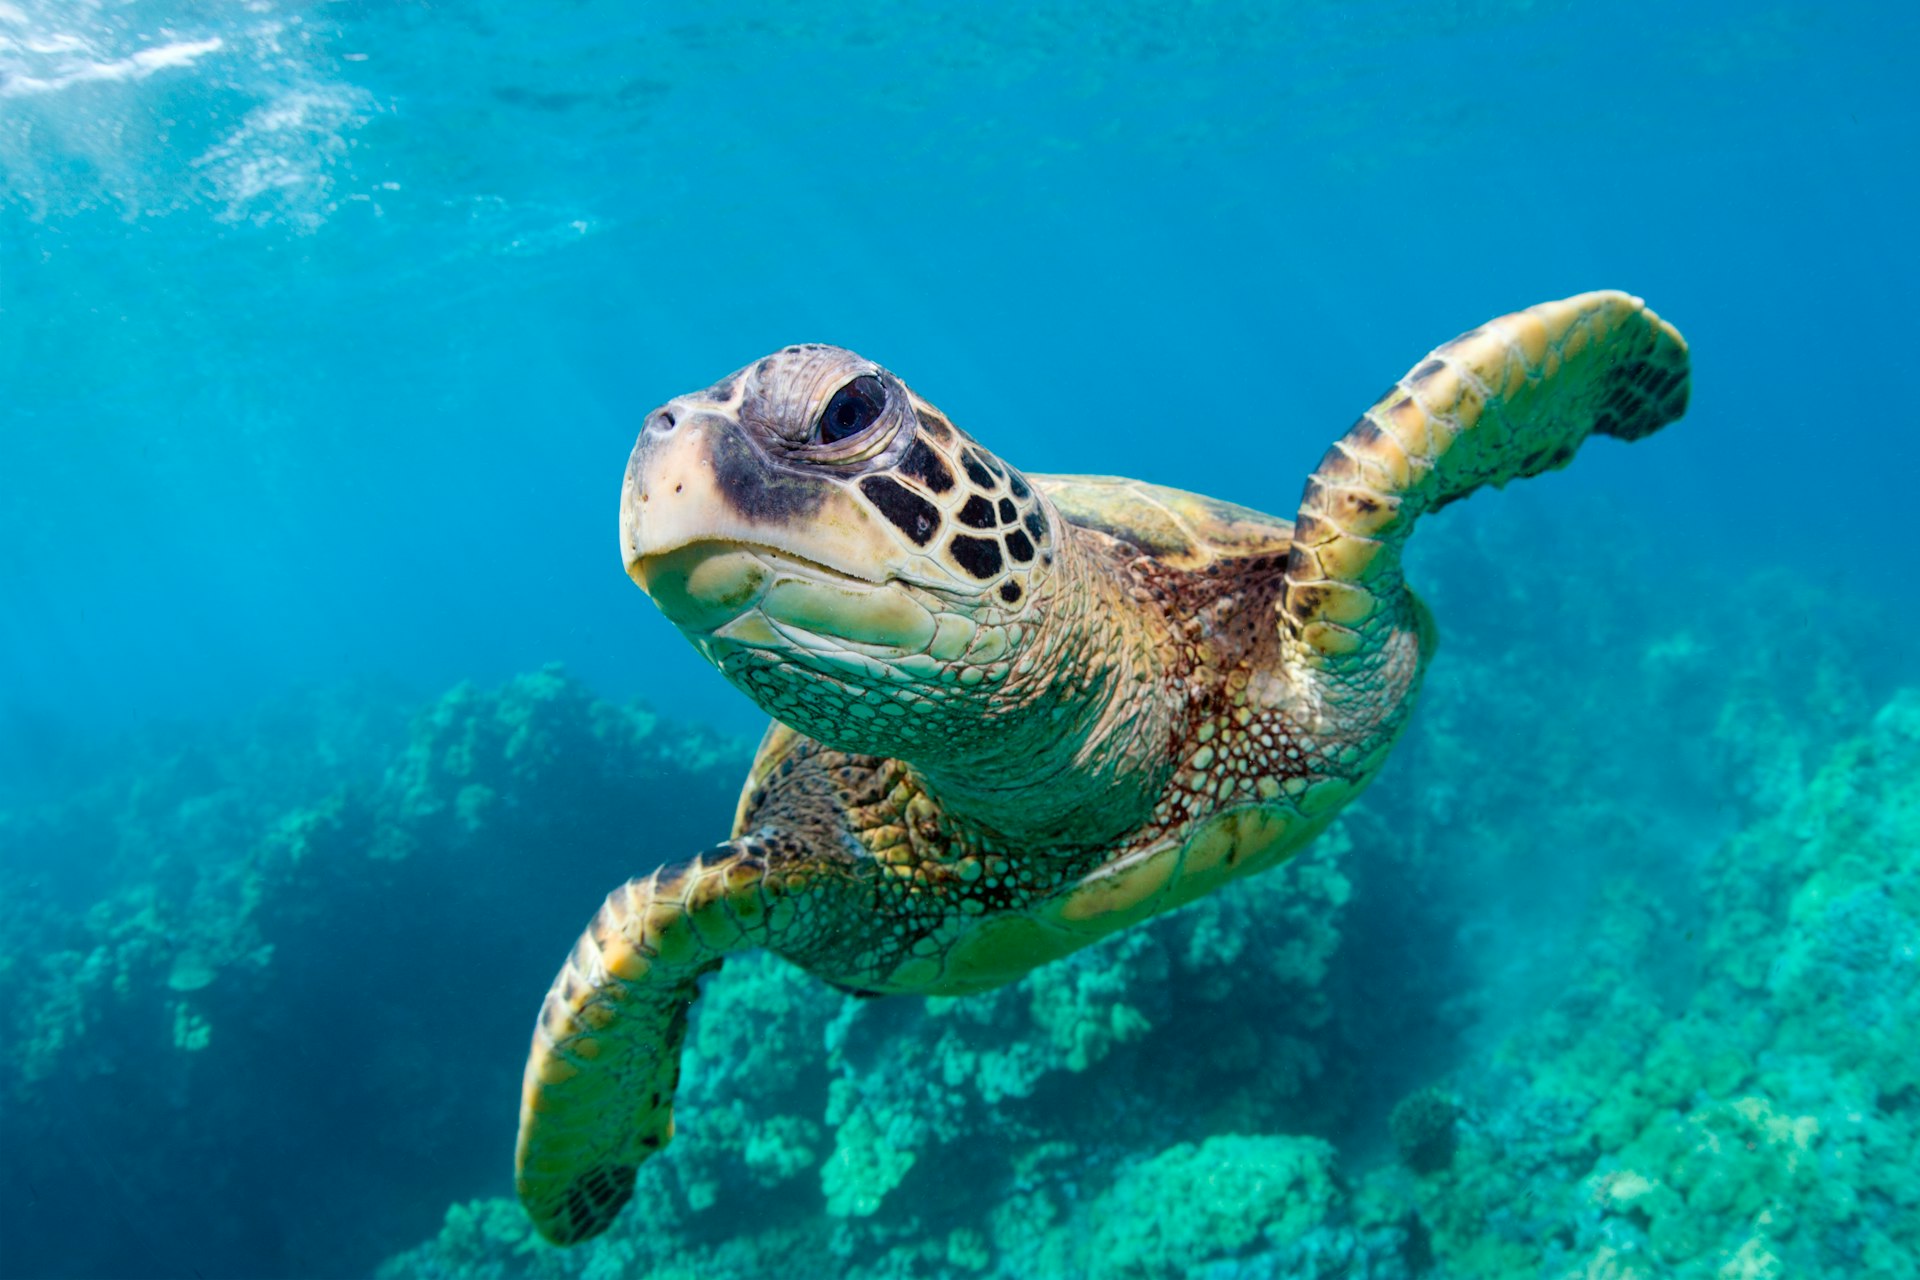 A green sea turtle pictured underwater